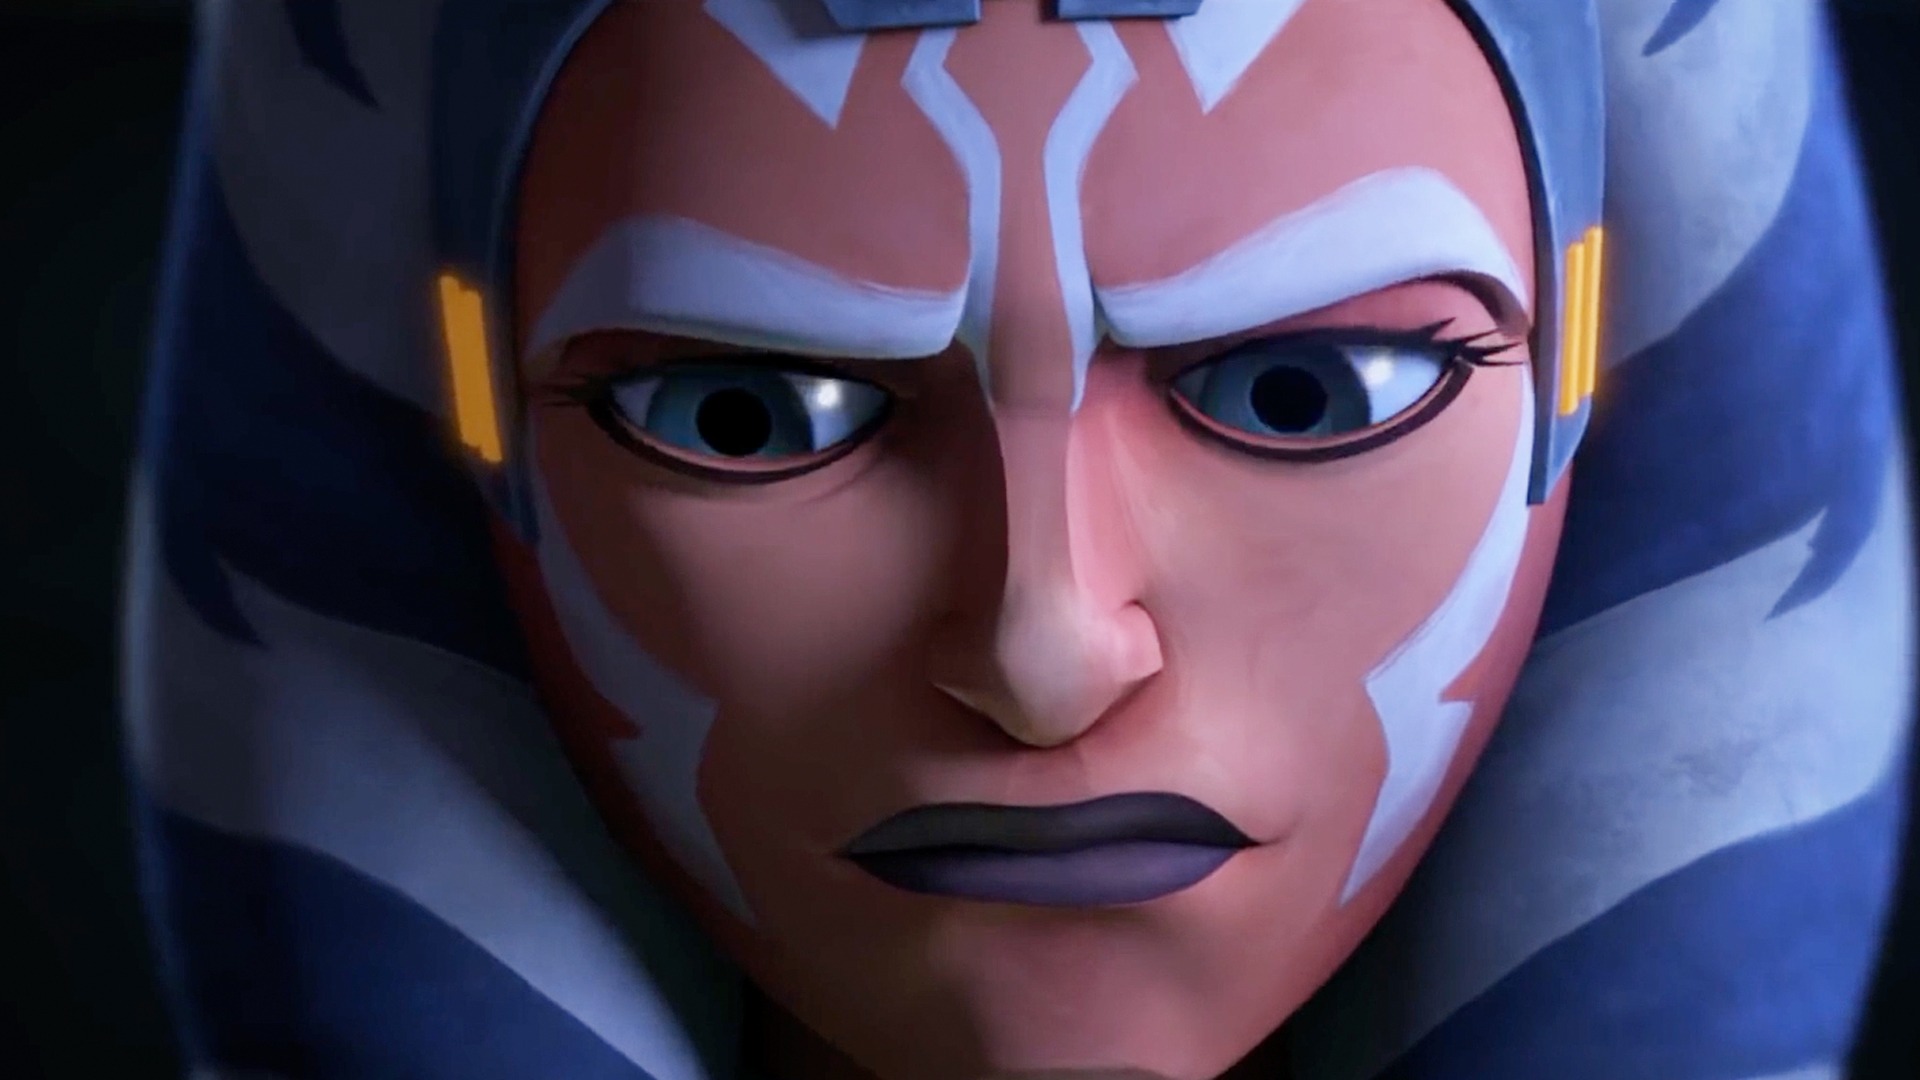 AHSOKA Is Officially Certified Fresh On Rotten Tomatoes Following